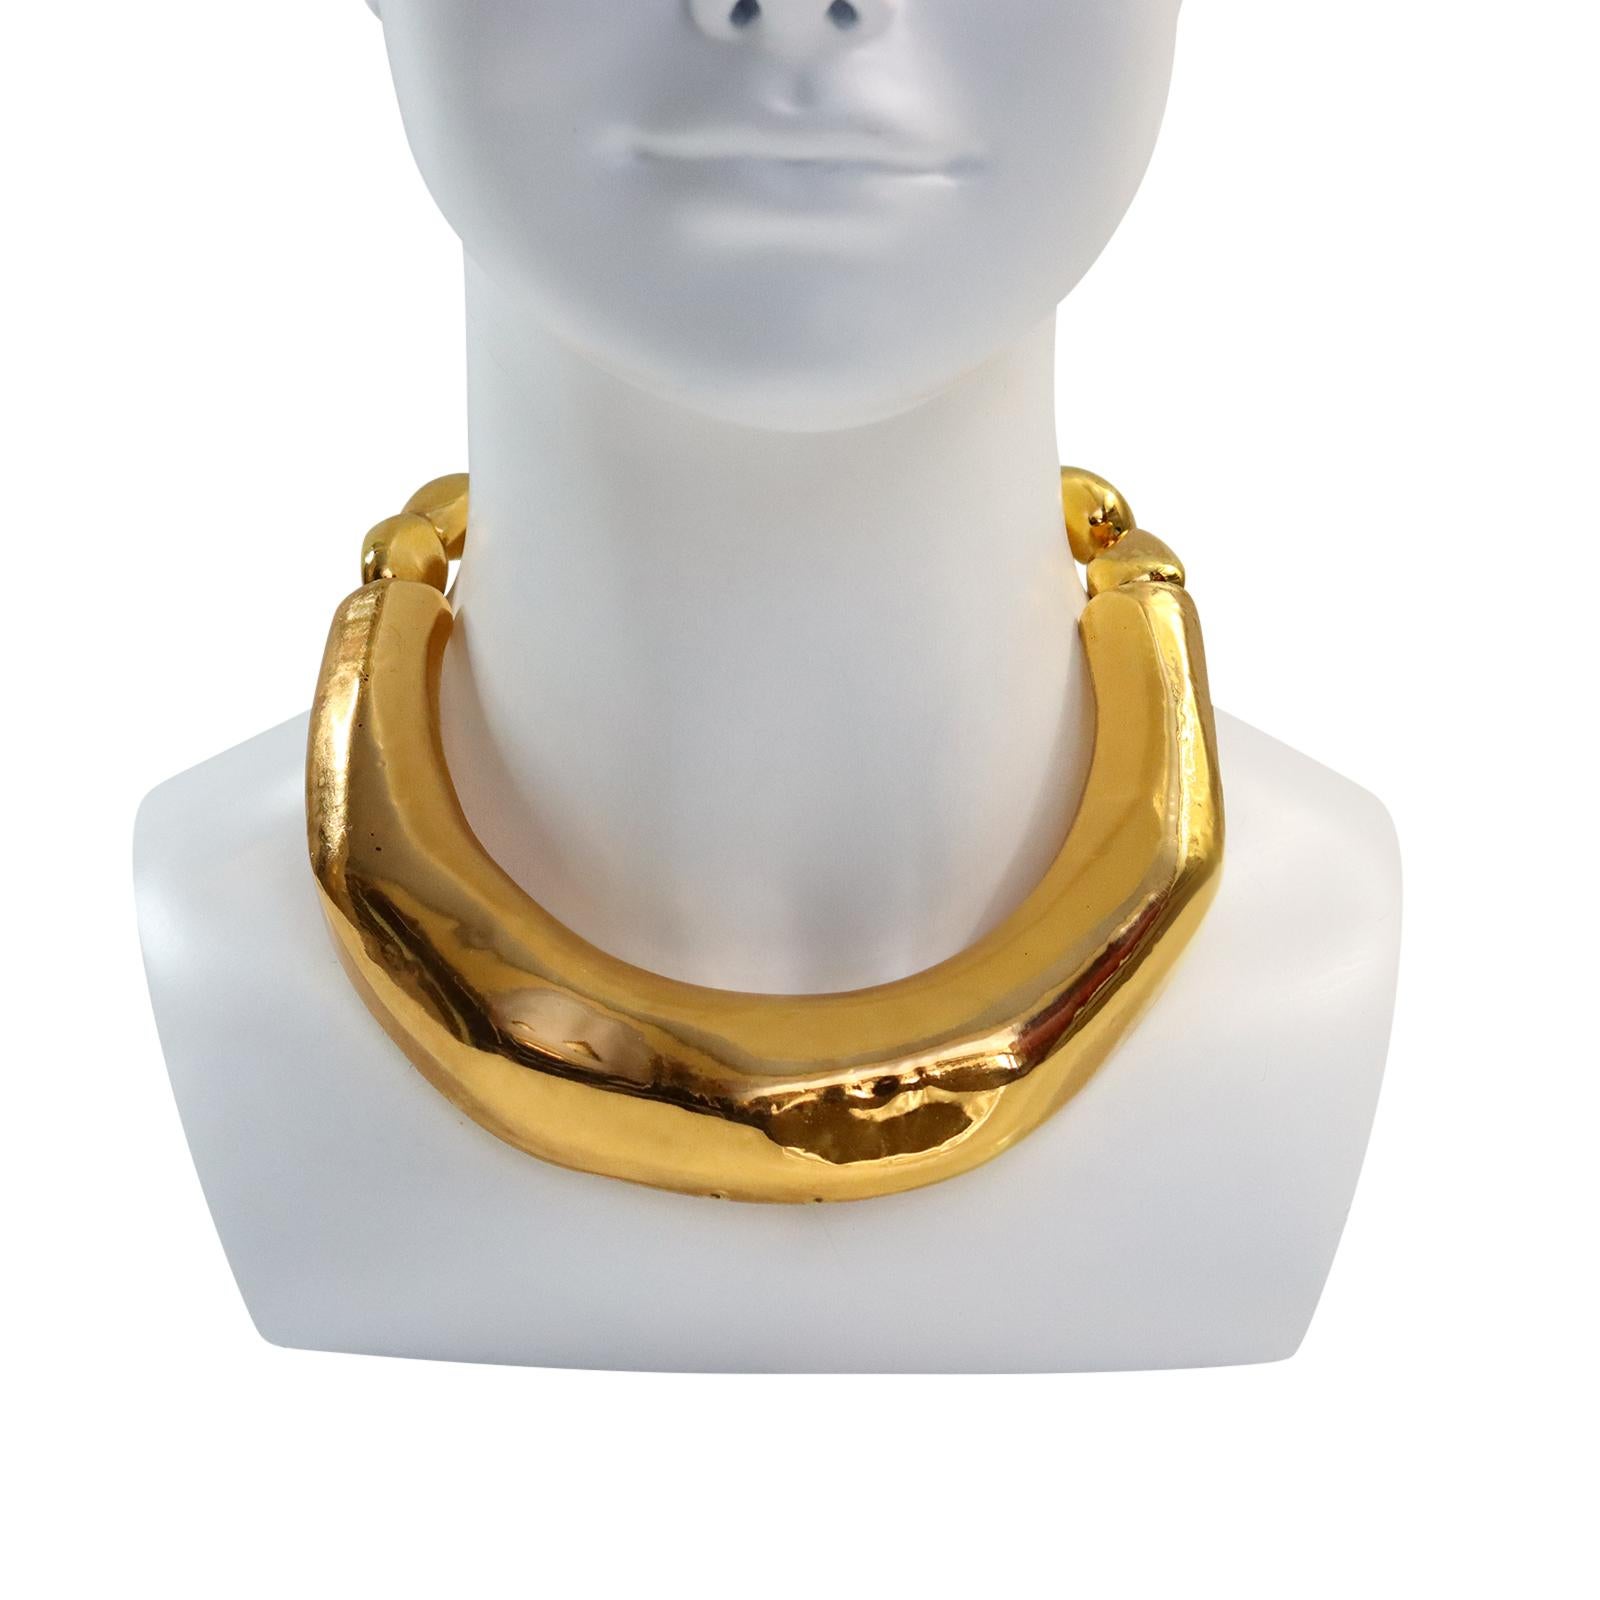 Vintage CHRISTIAN LACROIX  Wide Resin Gold Tone Choker Necklace Circa 1990s. This will elevate your look and be in style until the end of time. It looks so simple but it makes the entire look. Wide necklace/choker with 2 bead pieces on either end.